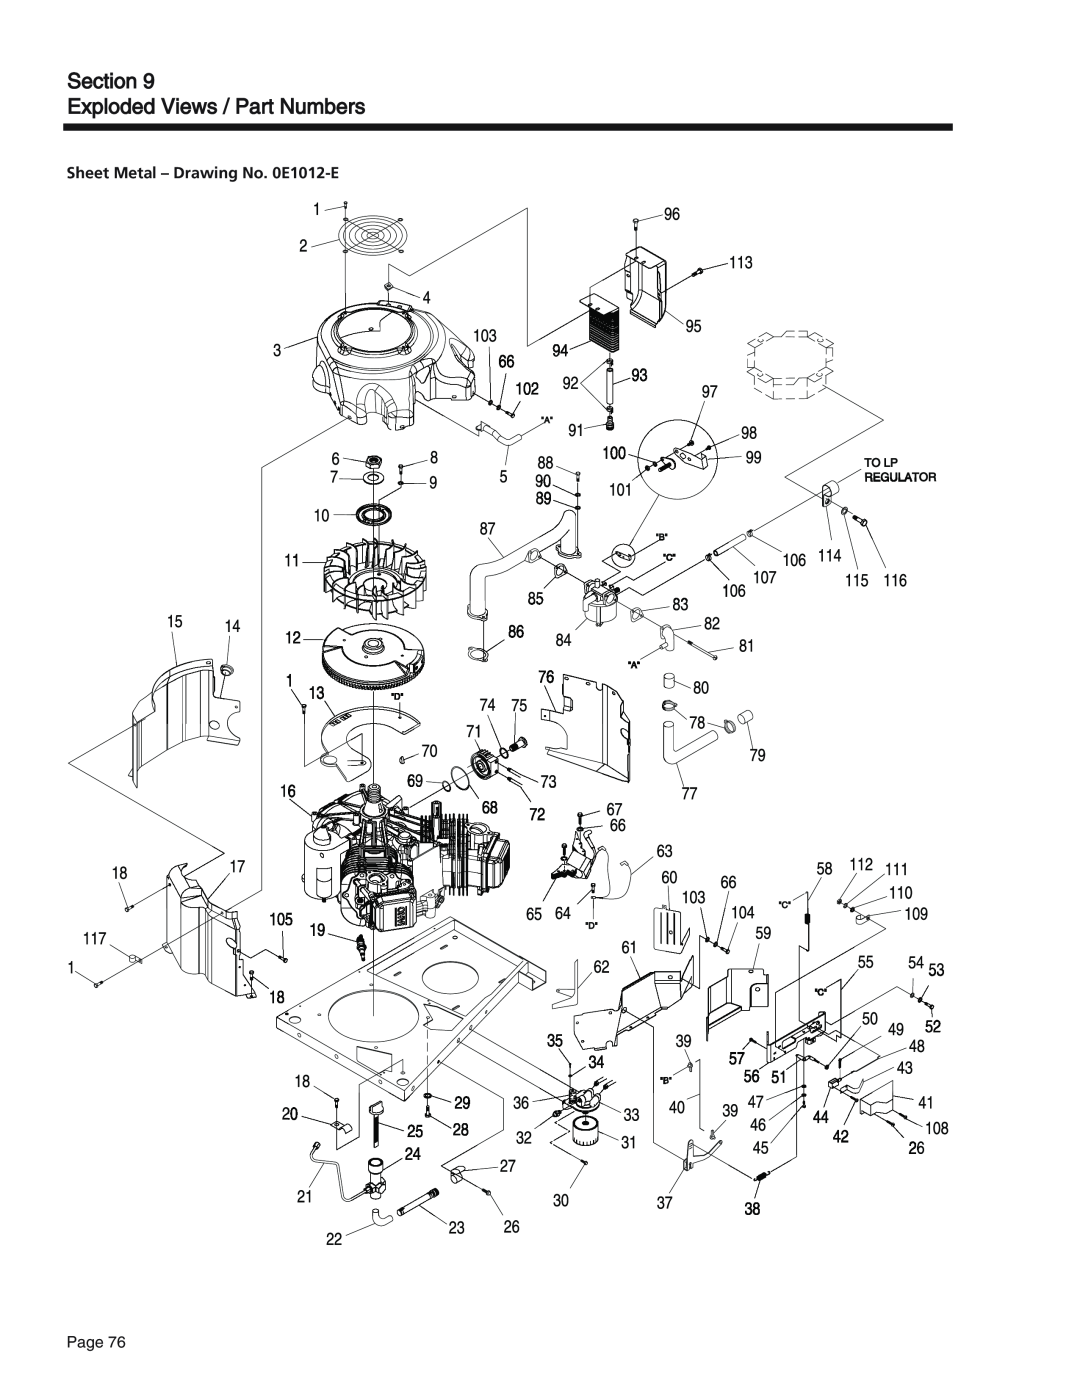 Generac Power Systems 55, 75, 65 manual Section Exploded Views / Part Numbers, Sheet Metal – Drawing No. 0E1012-E 